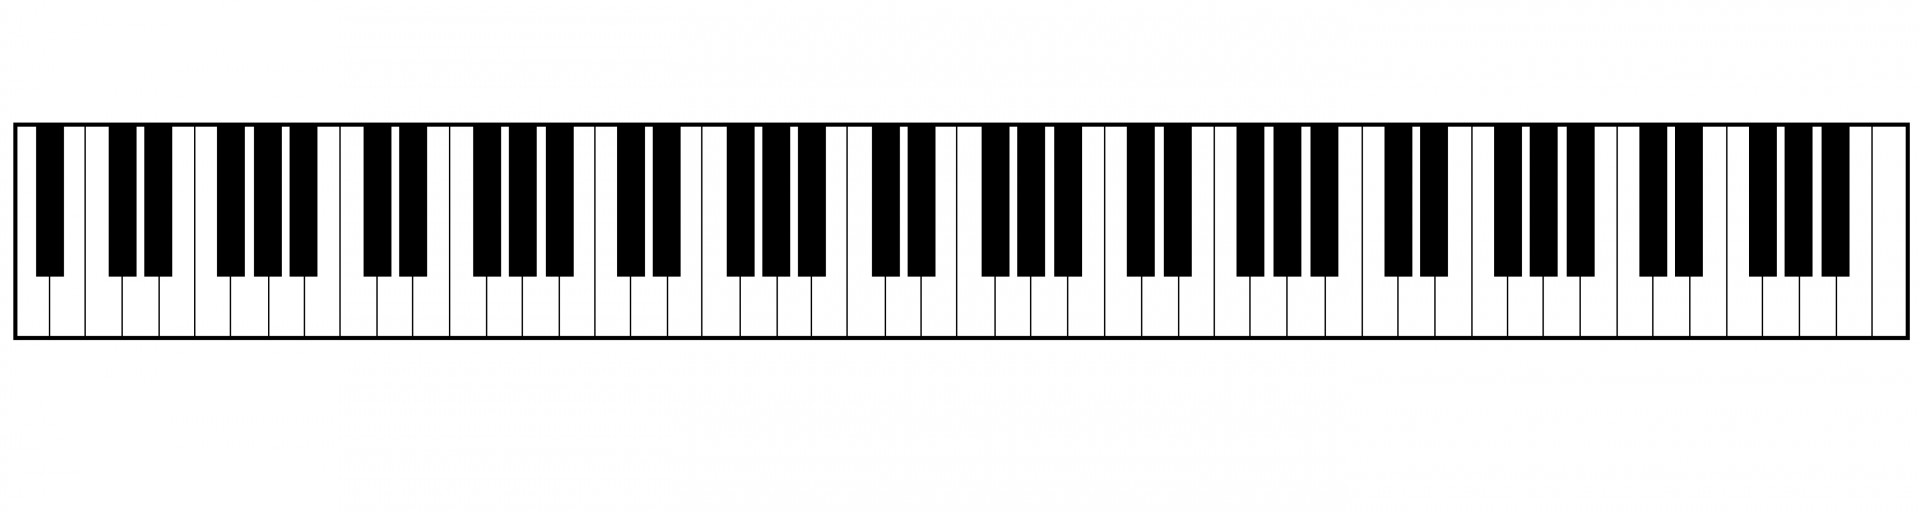 free-pic-of-piano-keys-download-free-pic-of-piano-keys-png-images